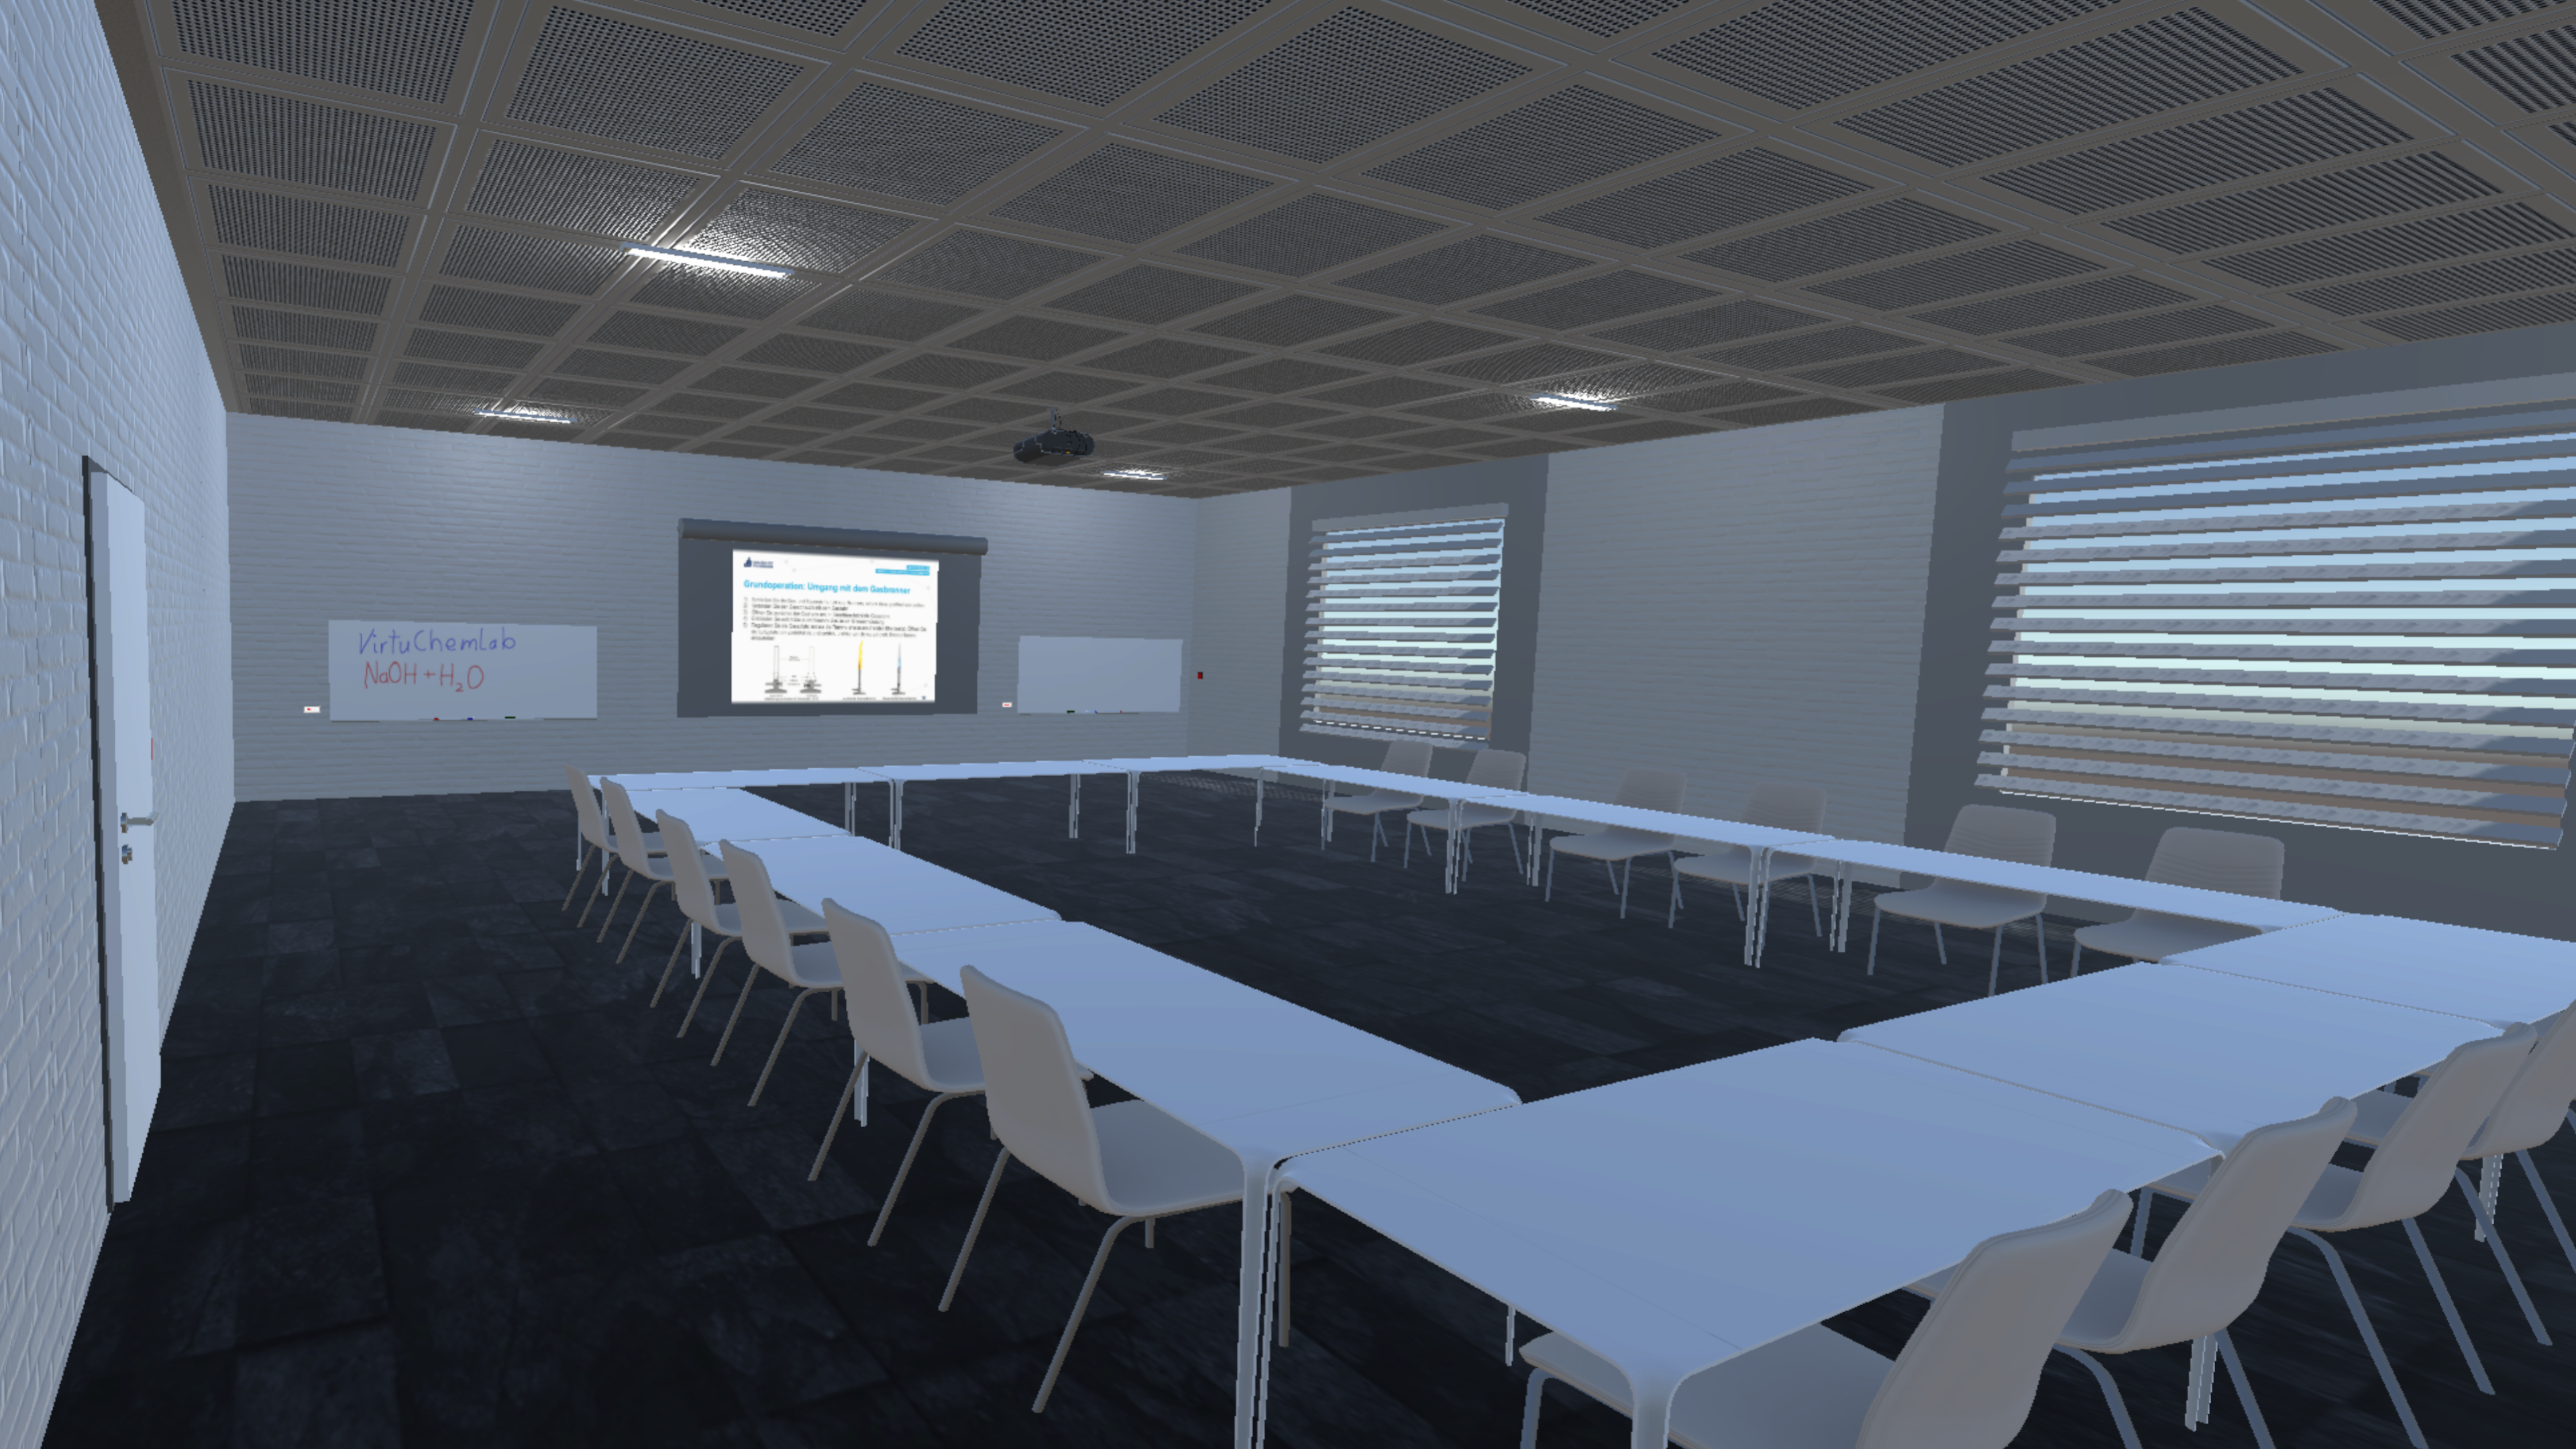 A screenshot showing the virtual seminar room. It is composed of a circle of tables with to white boards and a projector in the back.